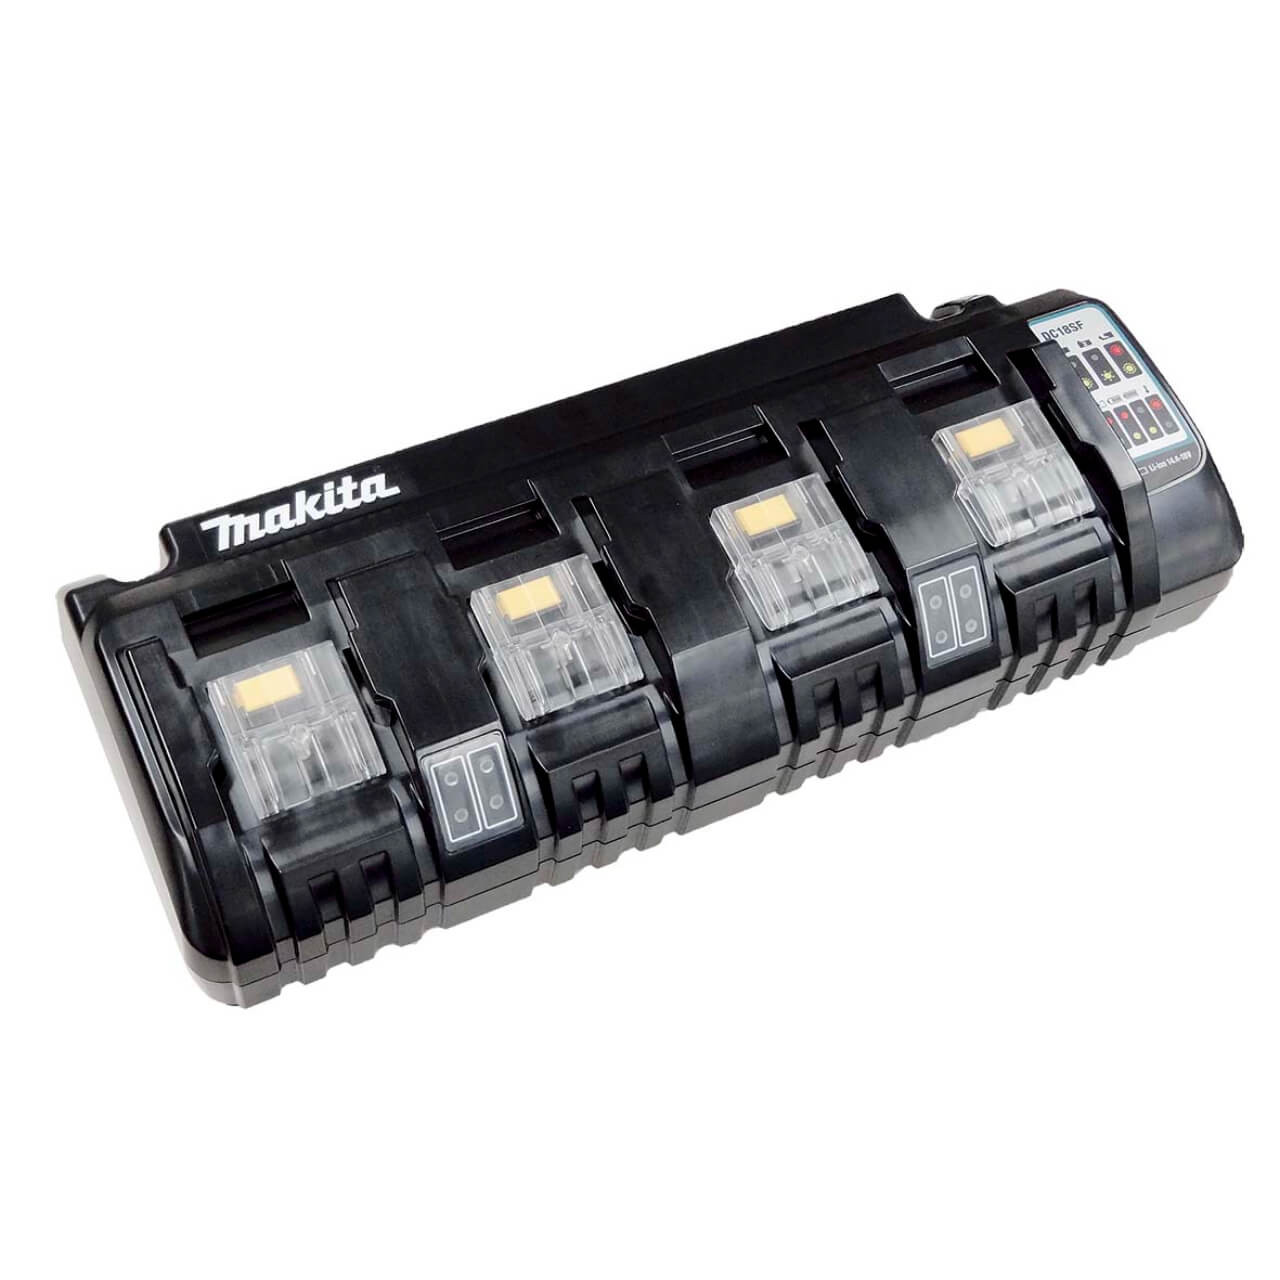 Makita 18V 4 Port Sequential Battery Charger (DC18SF)